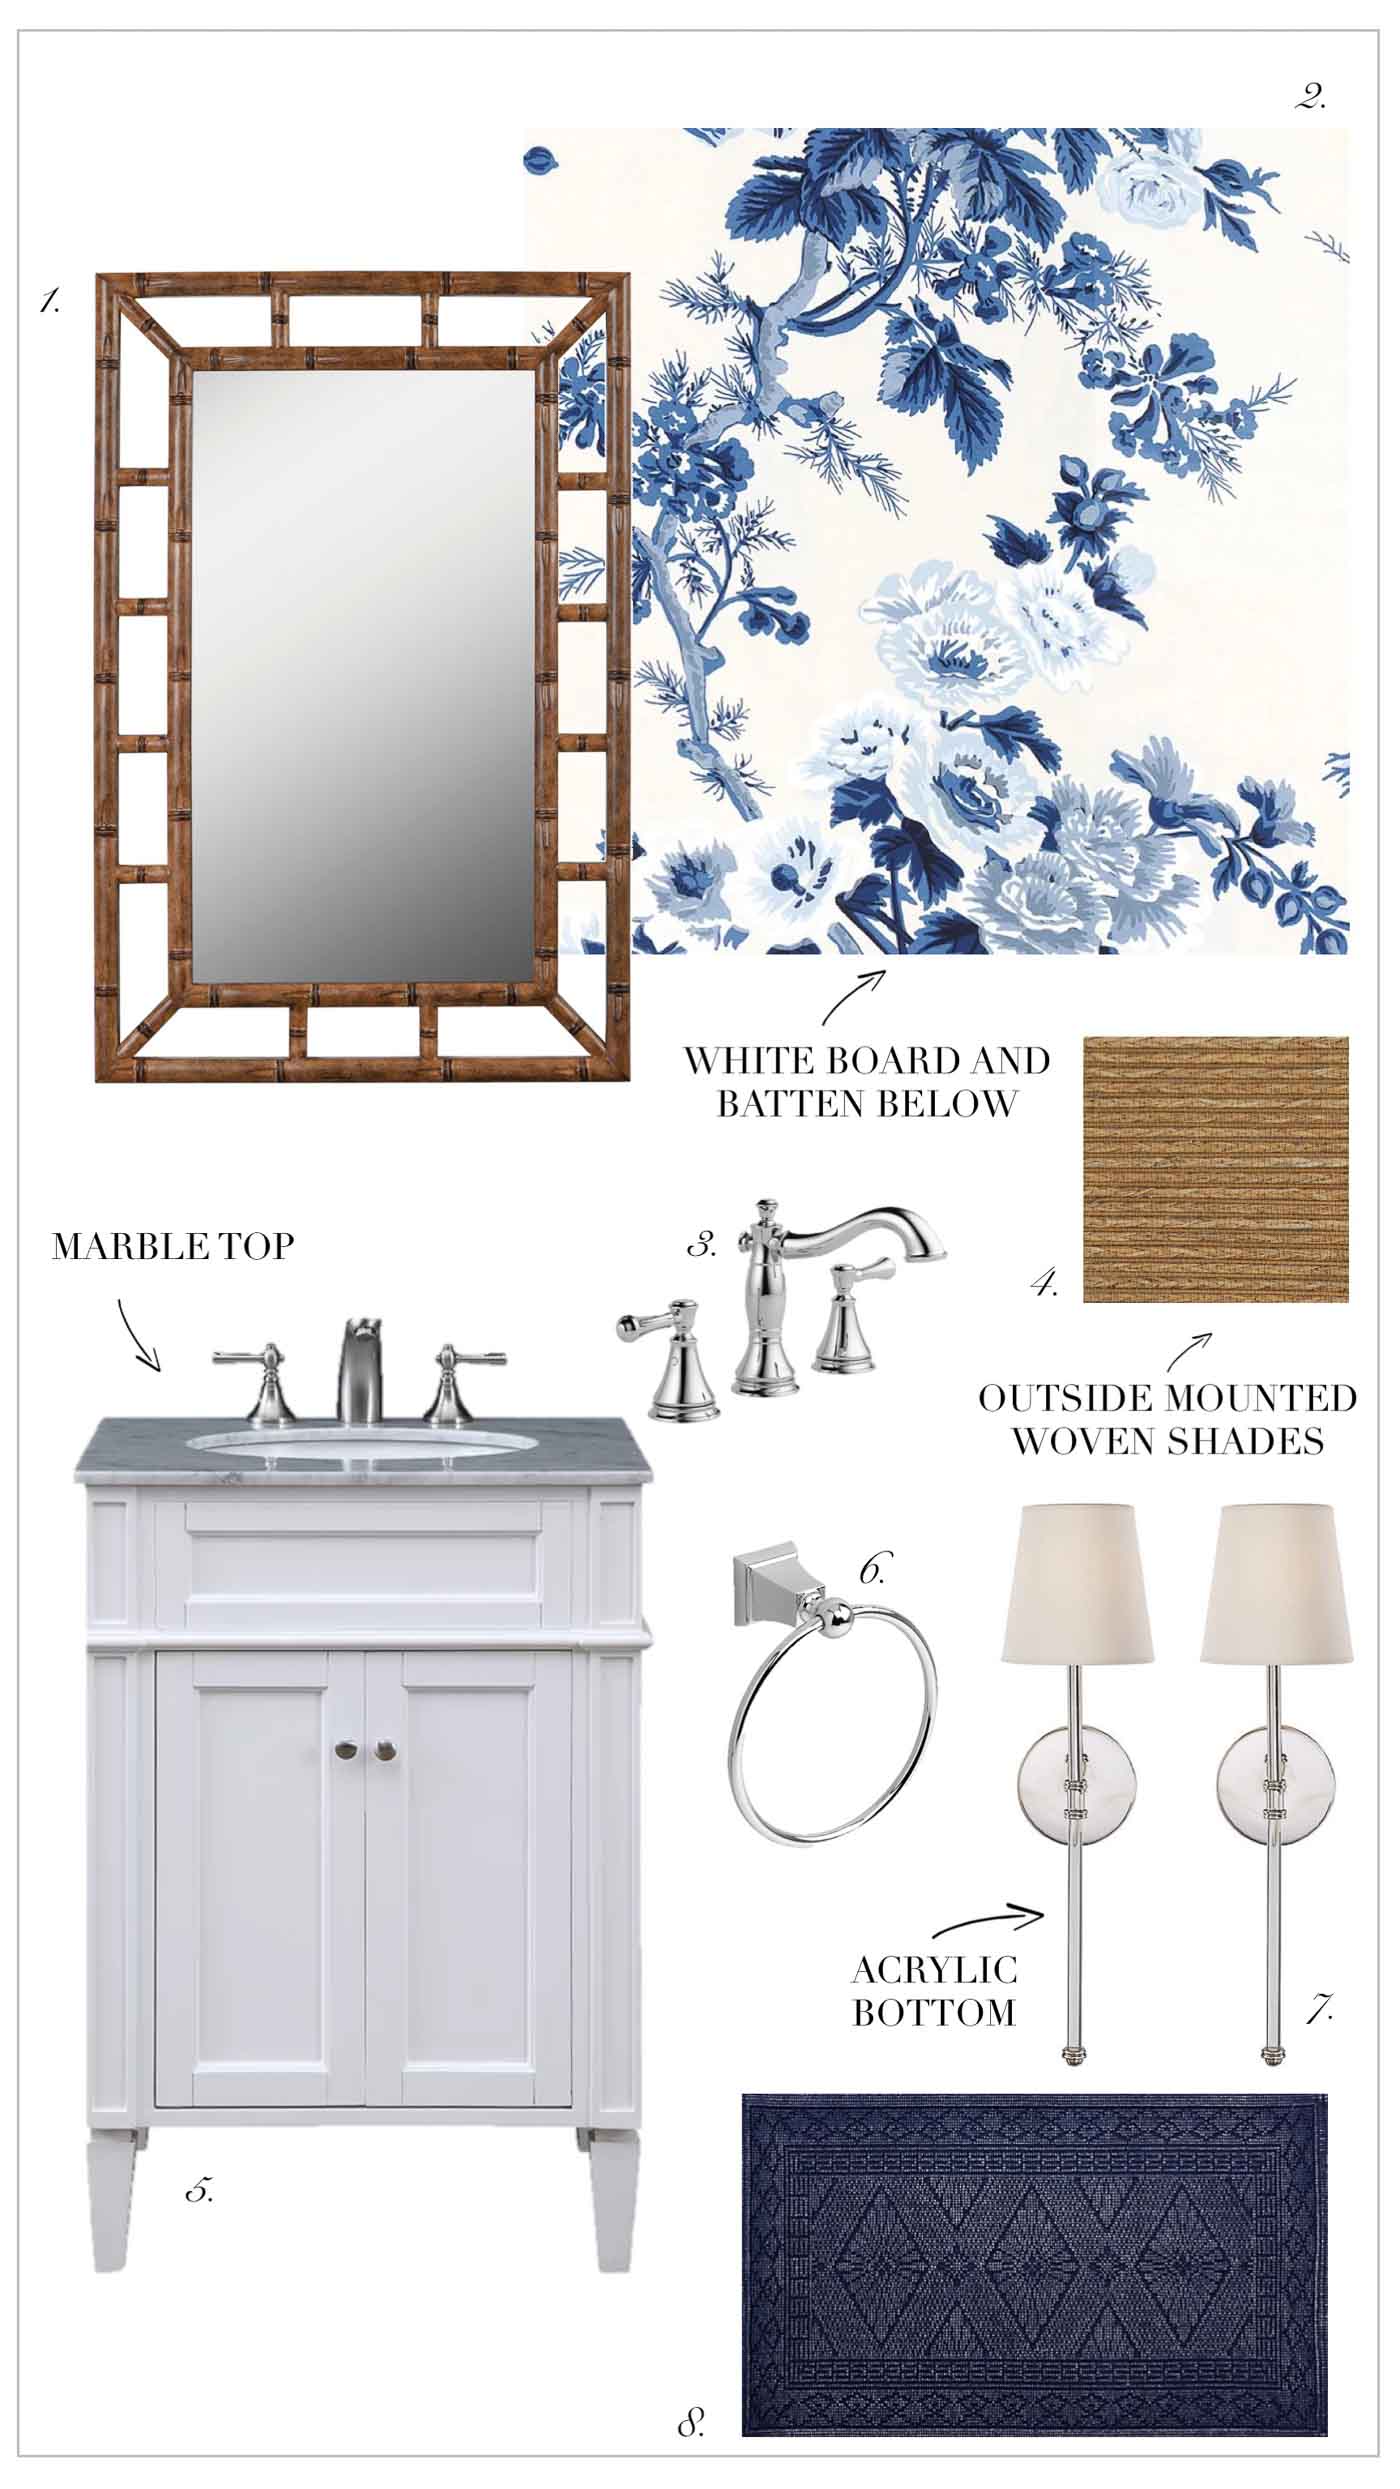 Powder Room Design Ideas with Small Vanity and Blue Floral Wallpaper